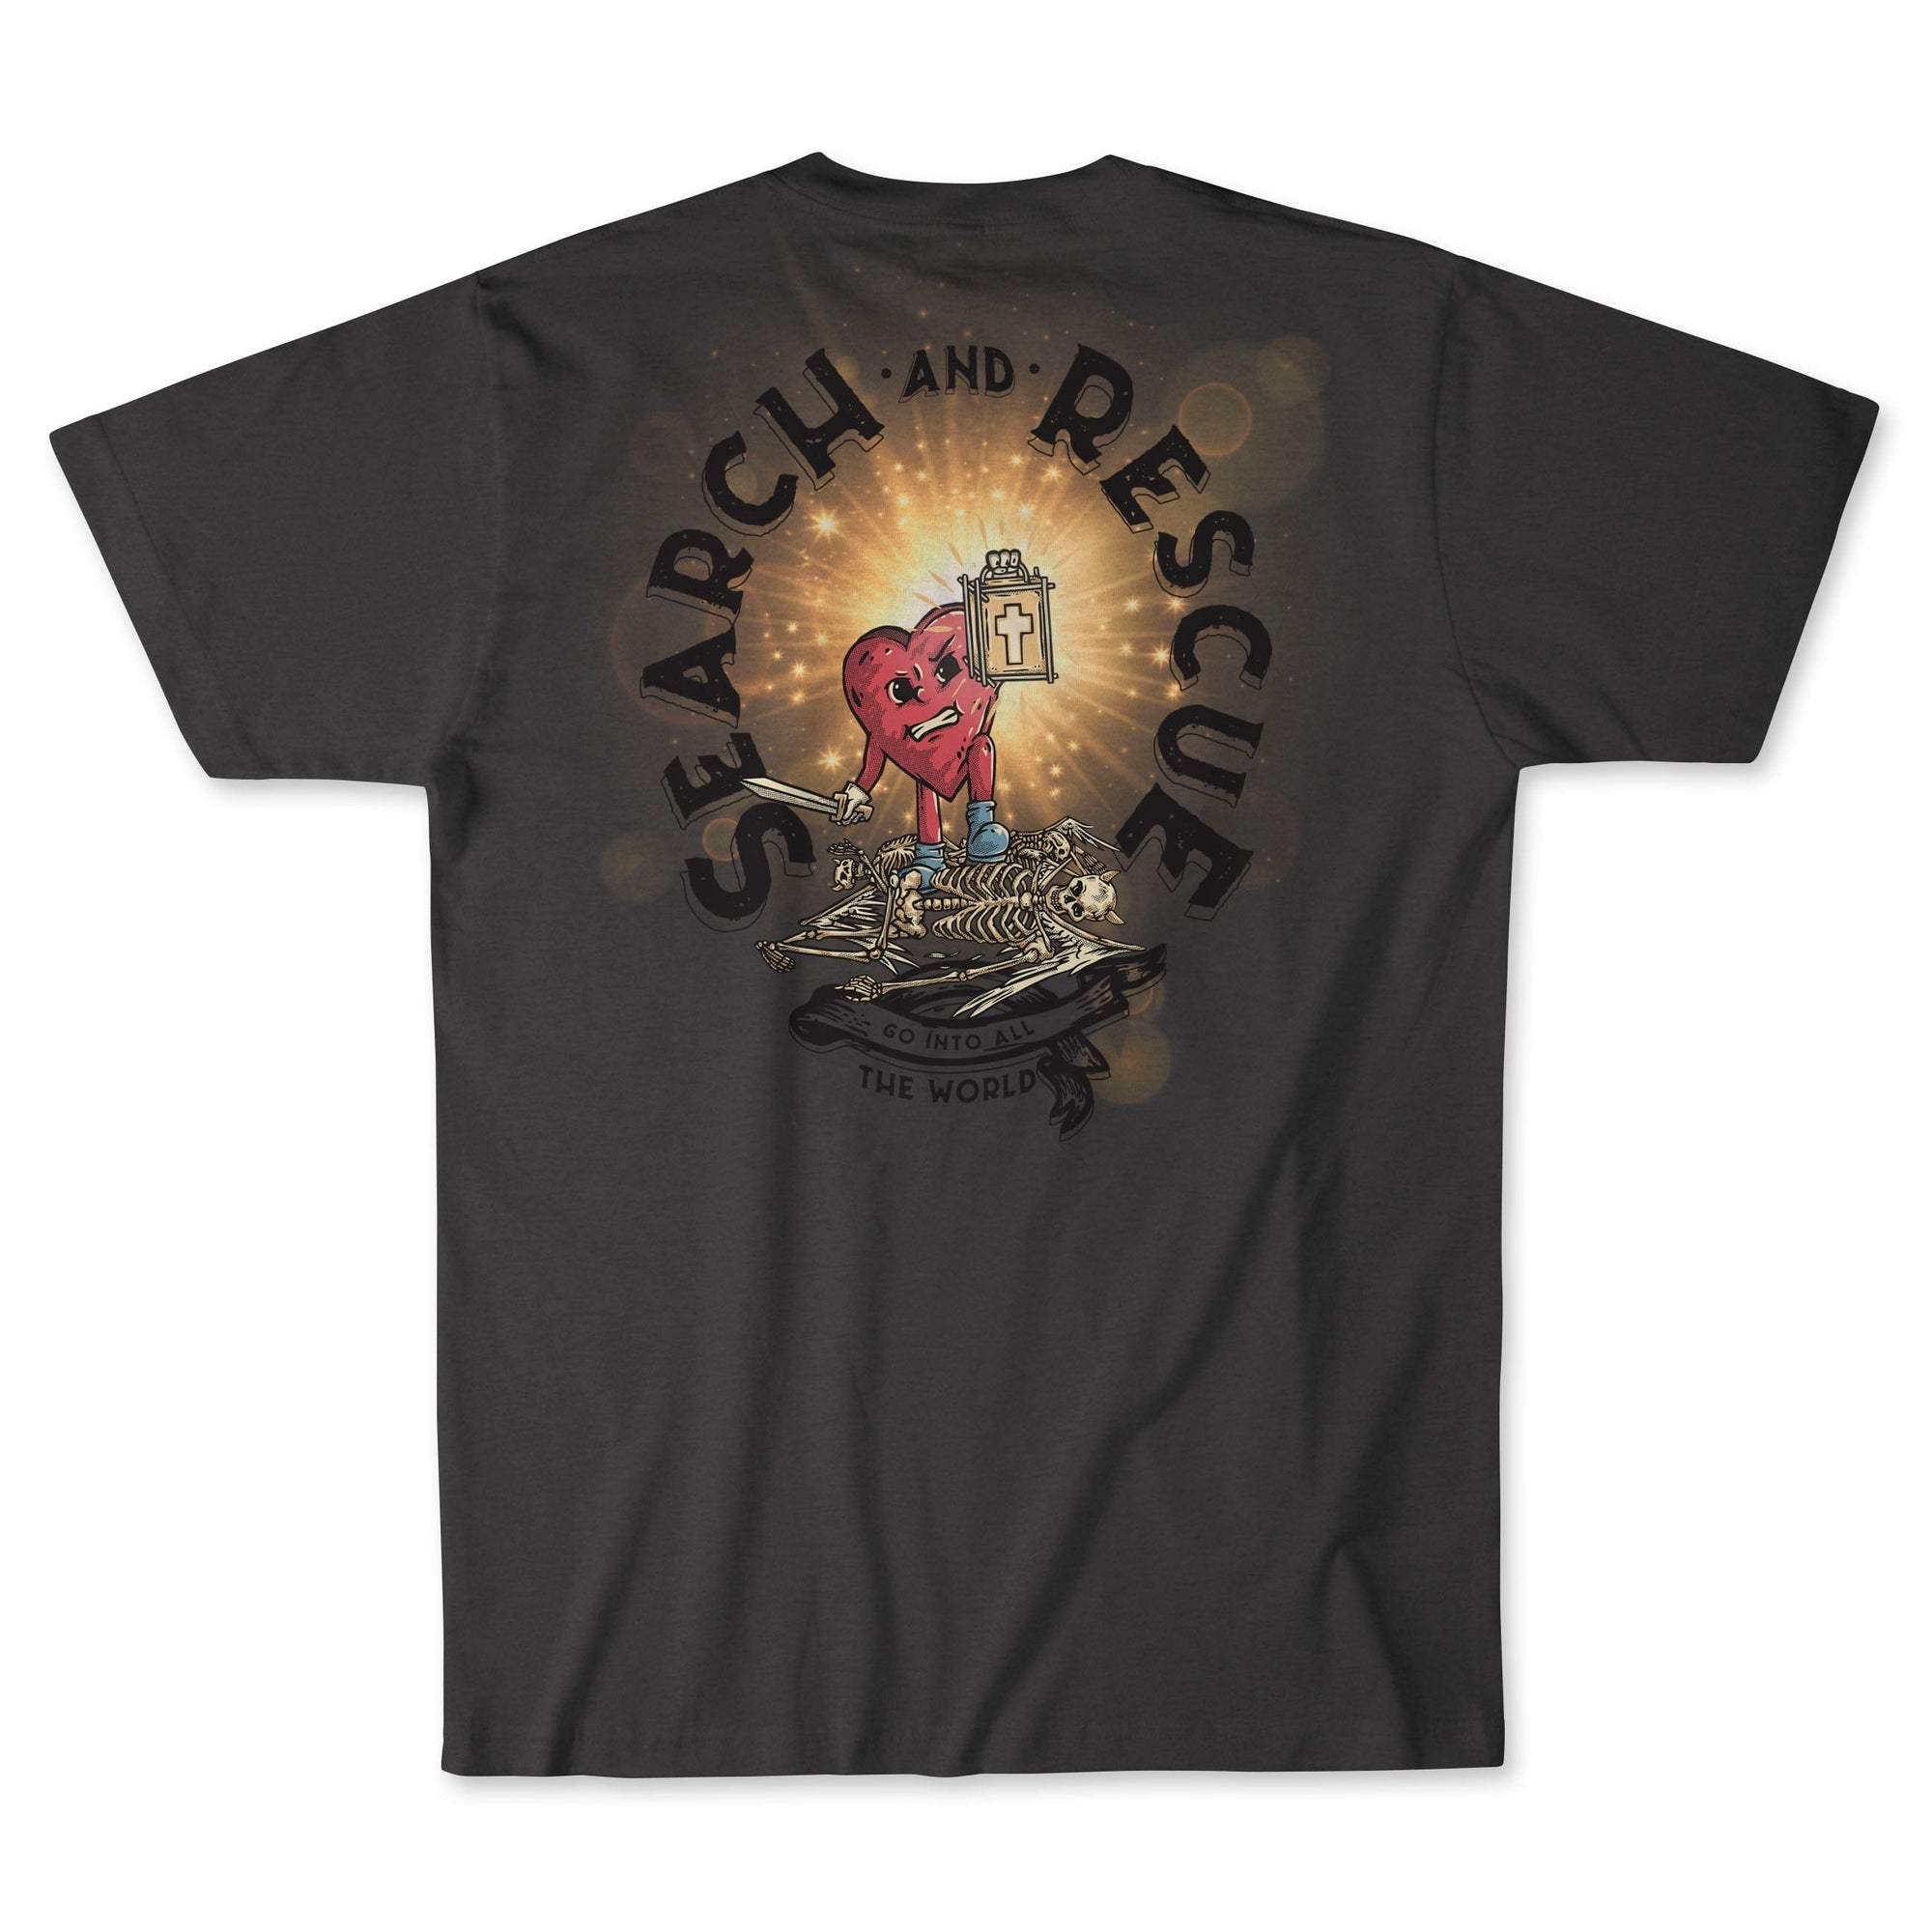 Barnabas Clothing Co. Shirts SEARCH & RESCUE Premium Classic Tee